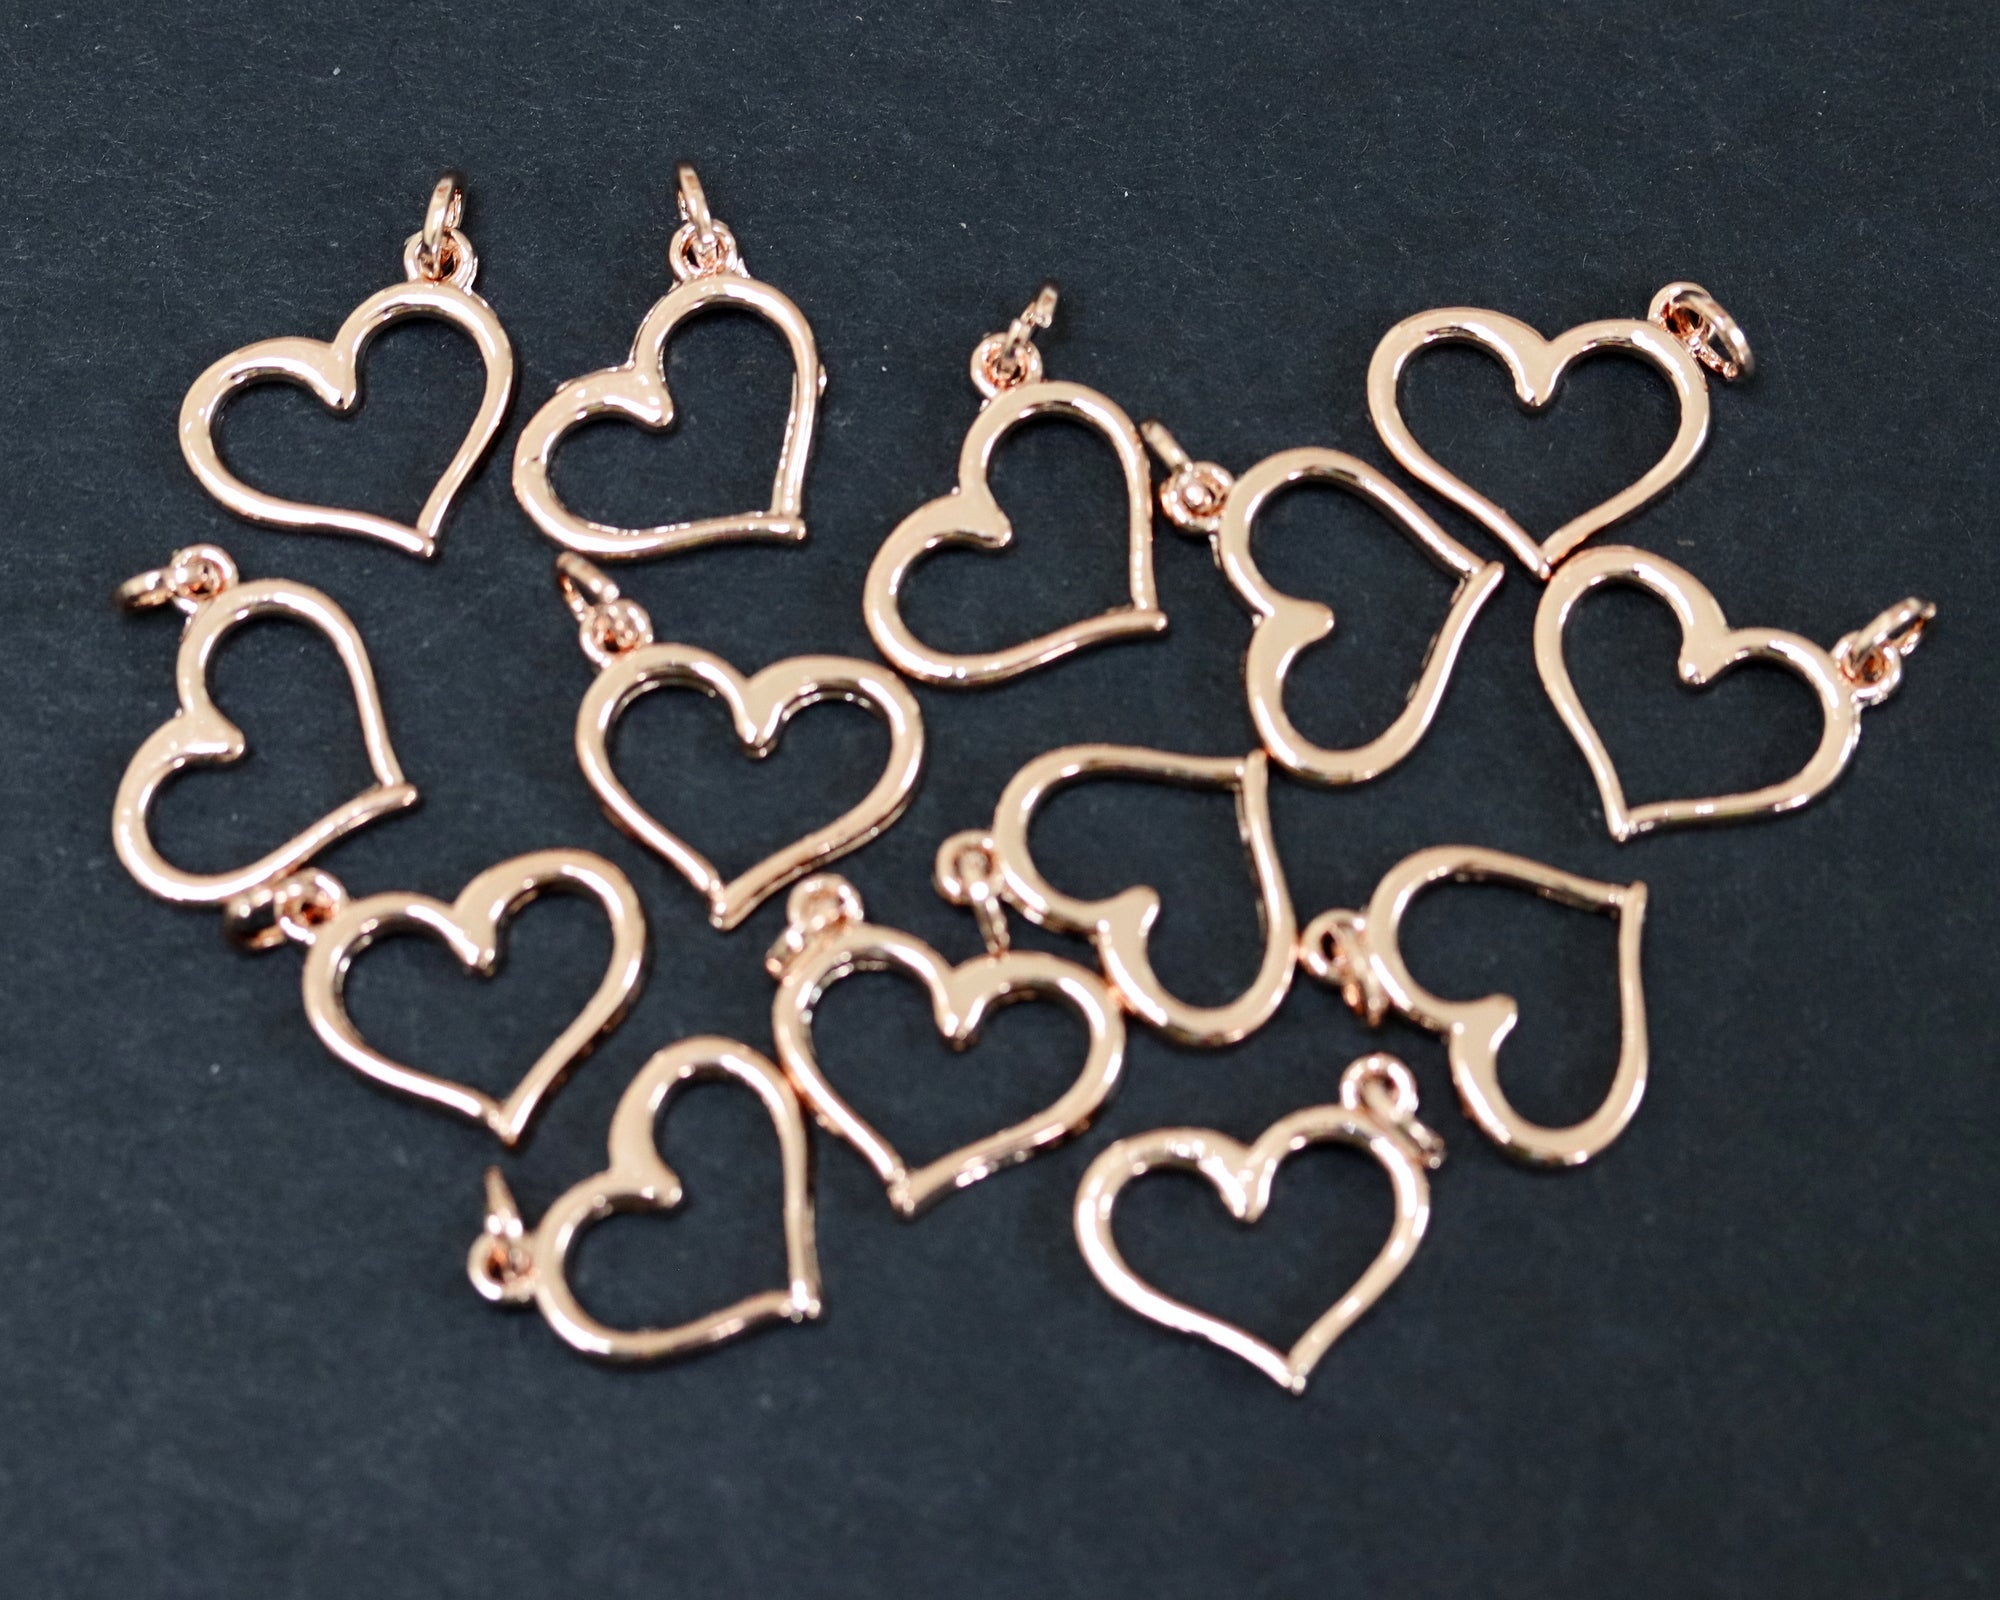 Heart charm 13x16mm 14K Rose Gold plated metal alloy pendant charm